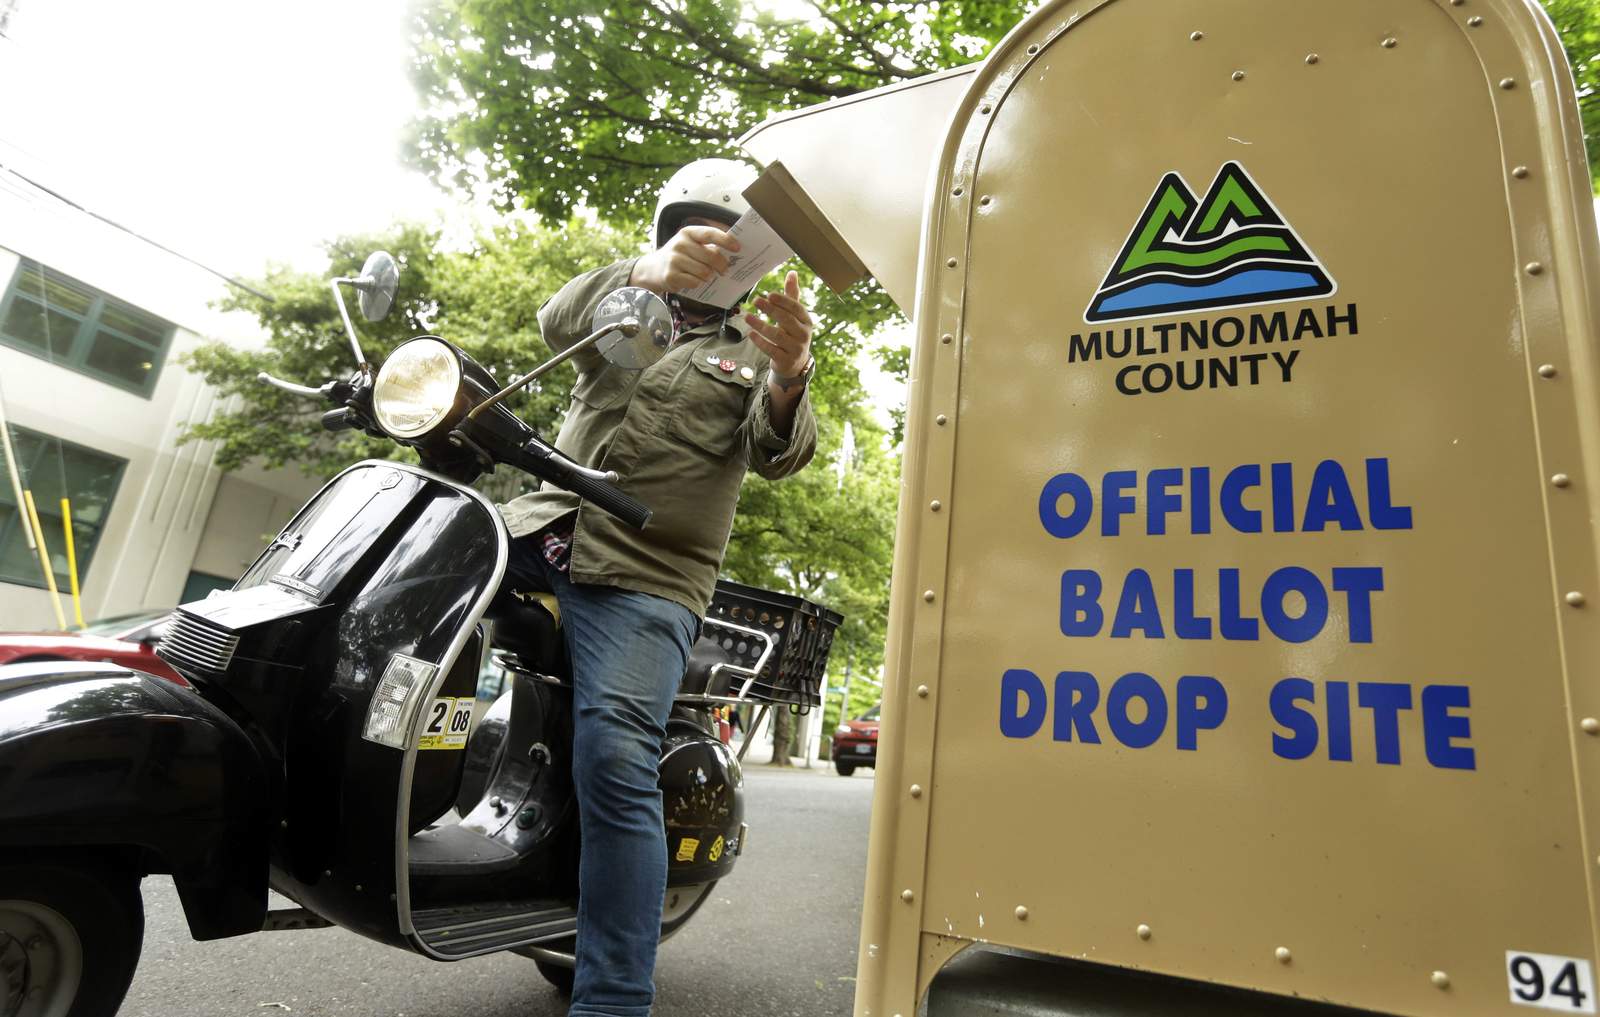 No turning back in the state that pioneered voting by mail